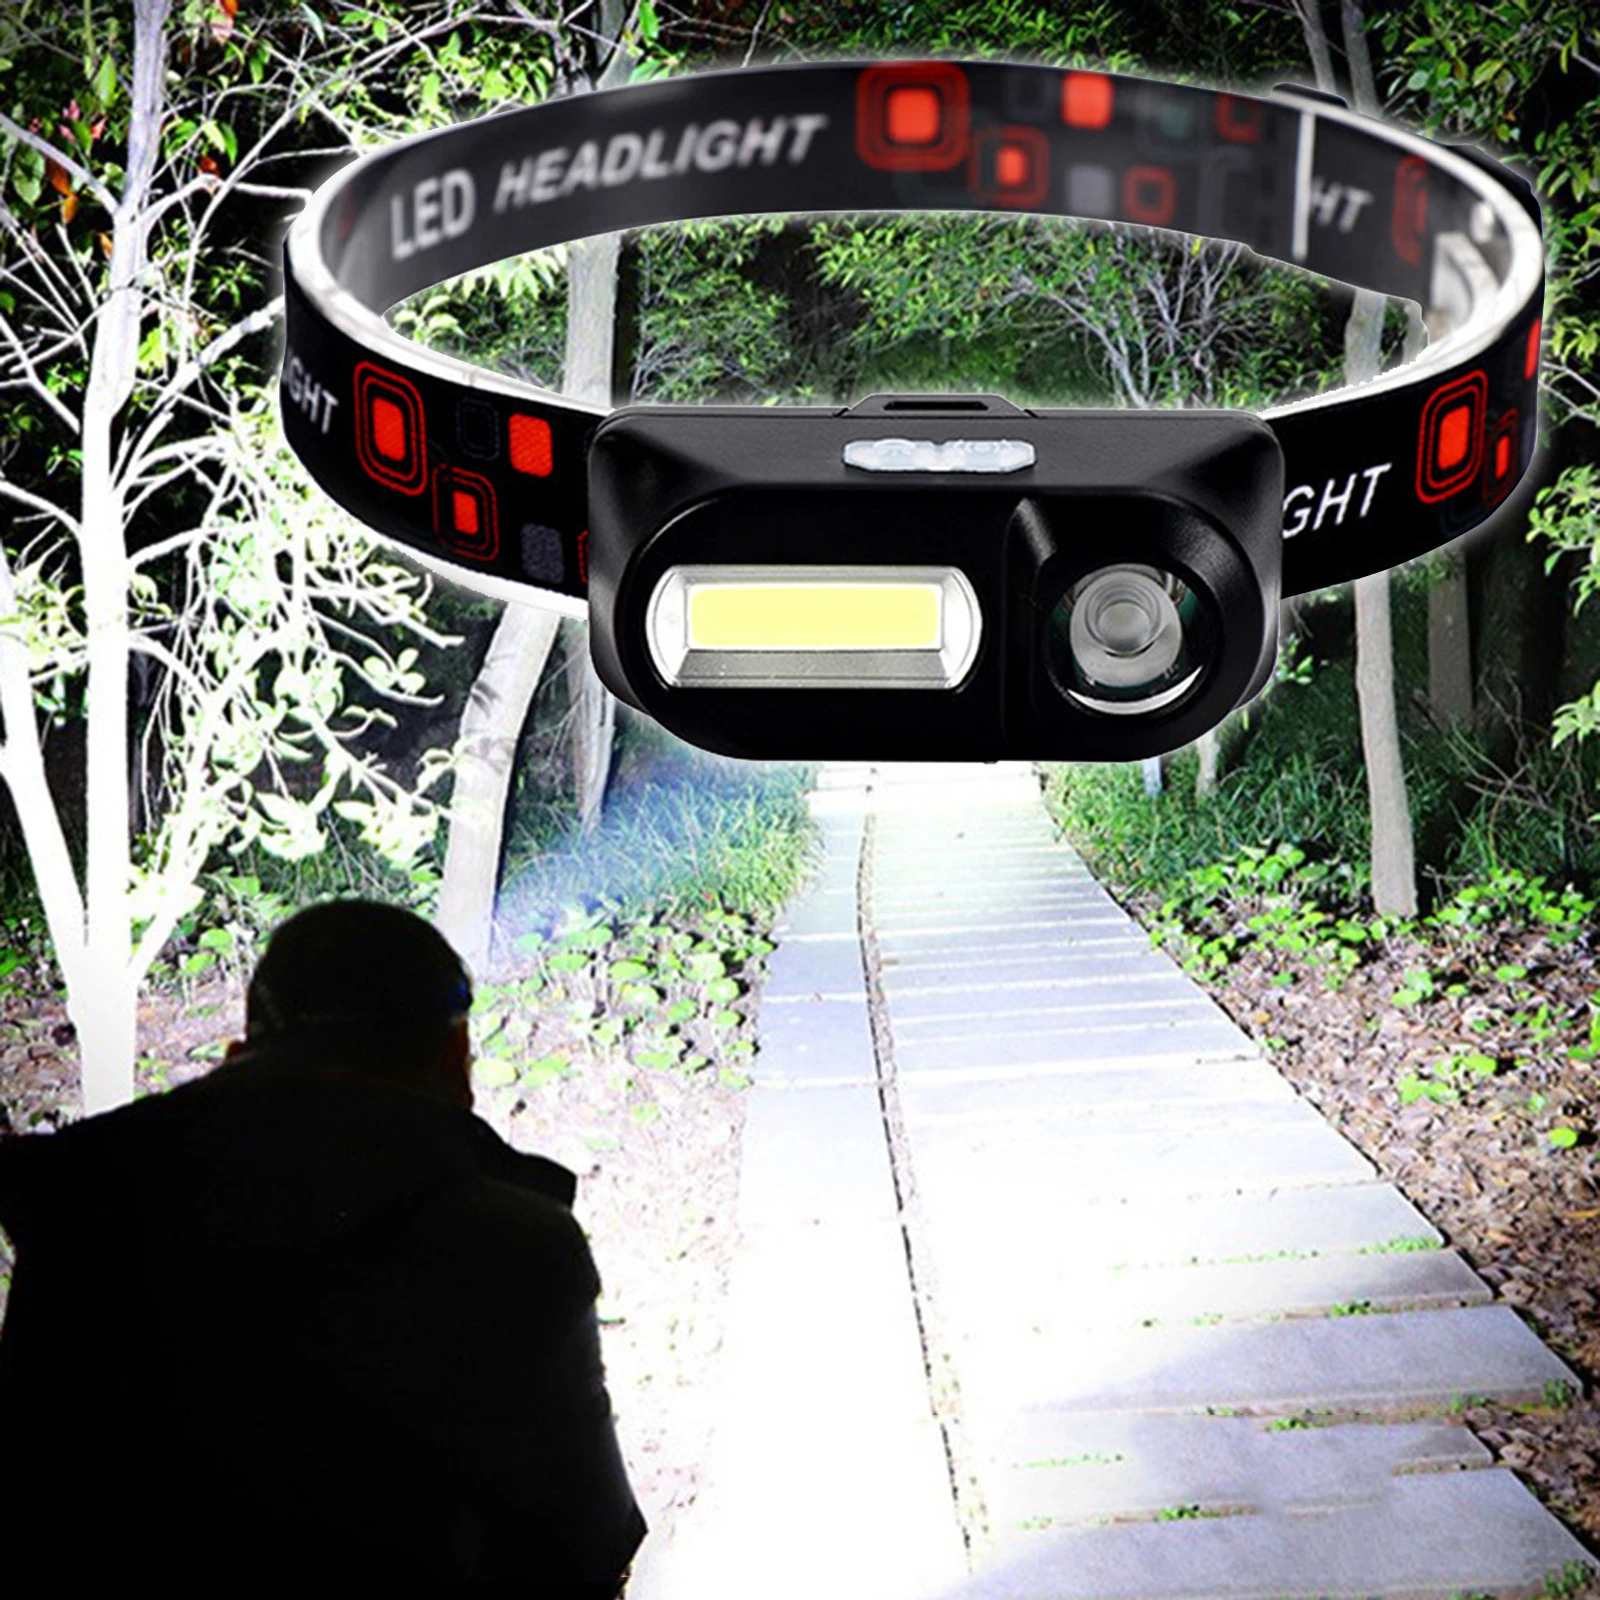 Super Bright Head Torch USB Rechargeable Headlamp Ultra Light LED COB Head Torch Headlight with 6 Modes for Reading, Hiking